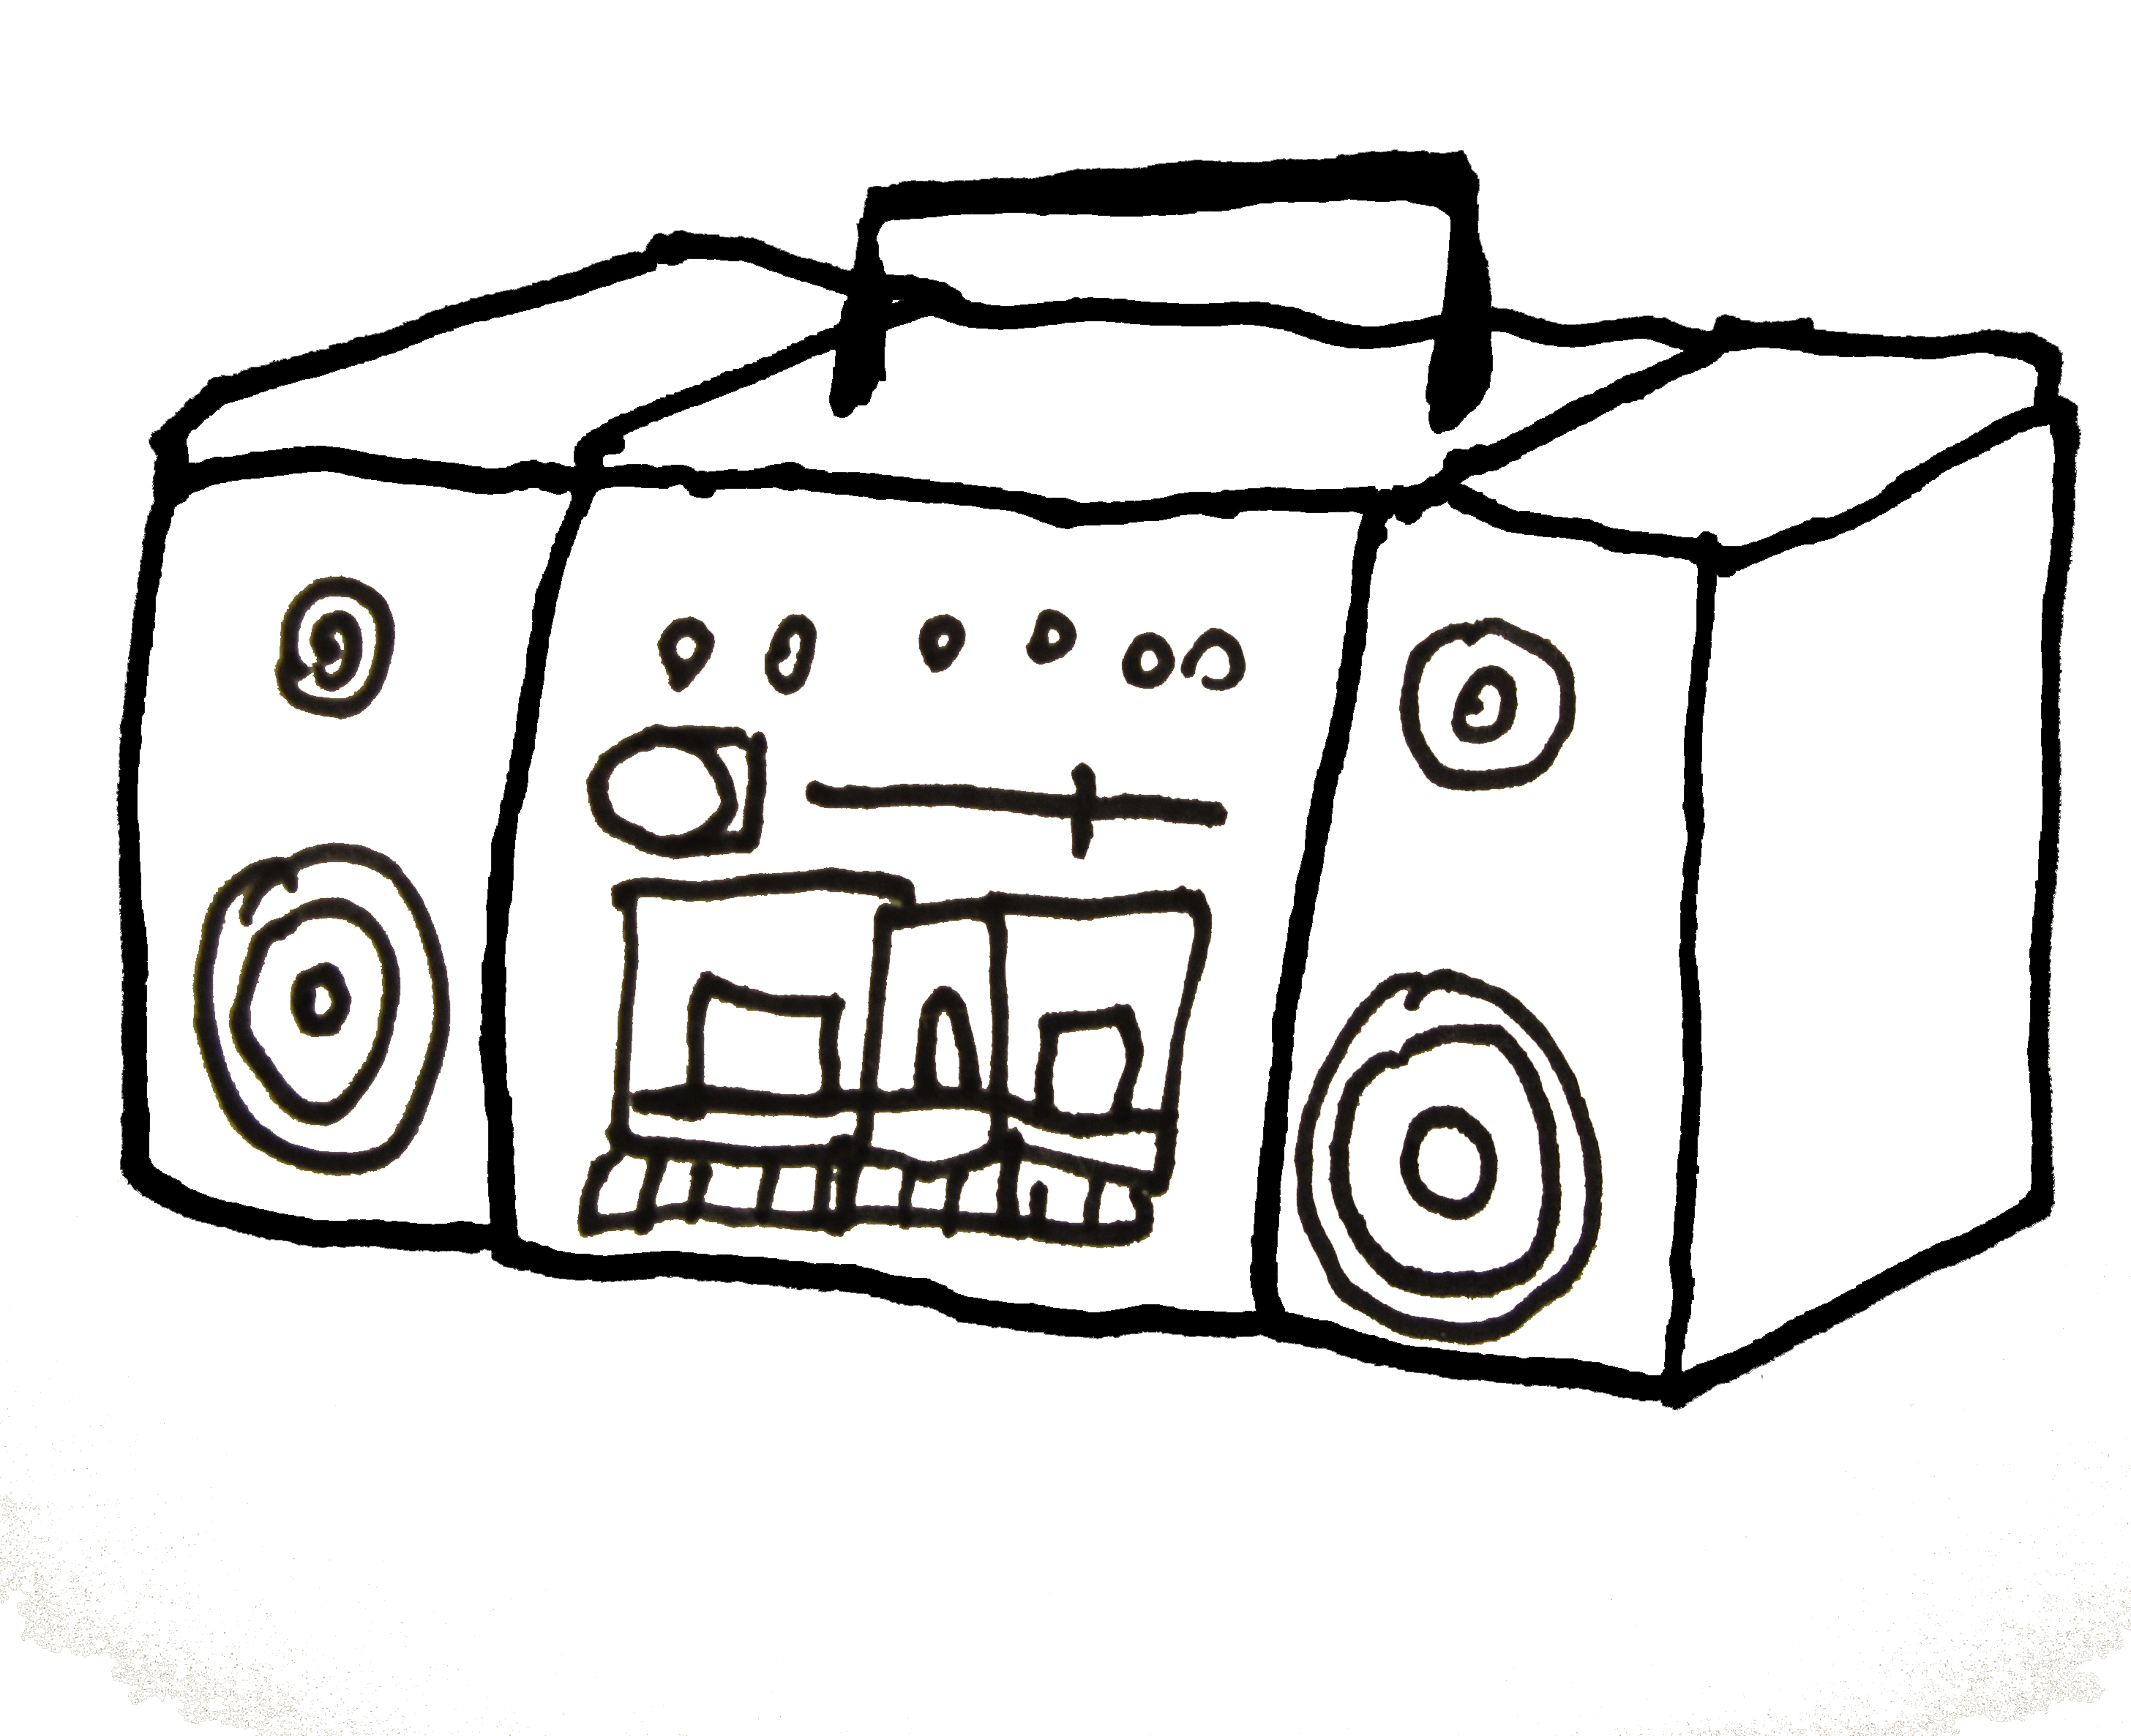 26 Boombox Drawing Free Cliparts That You Can Download To You Computer